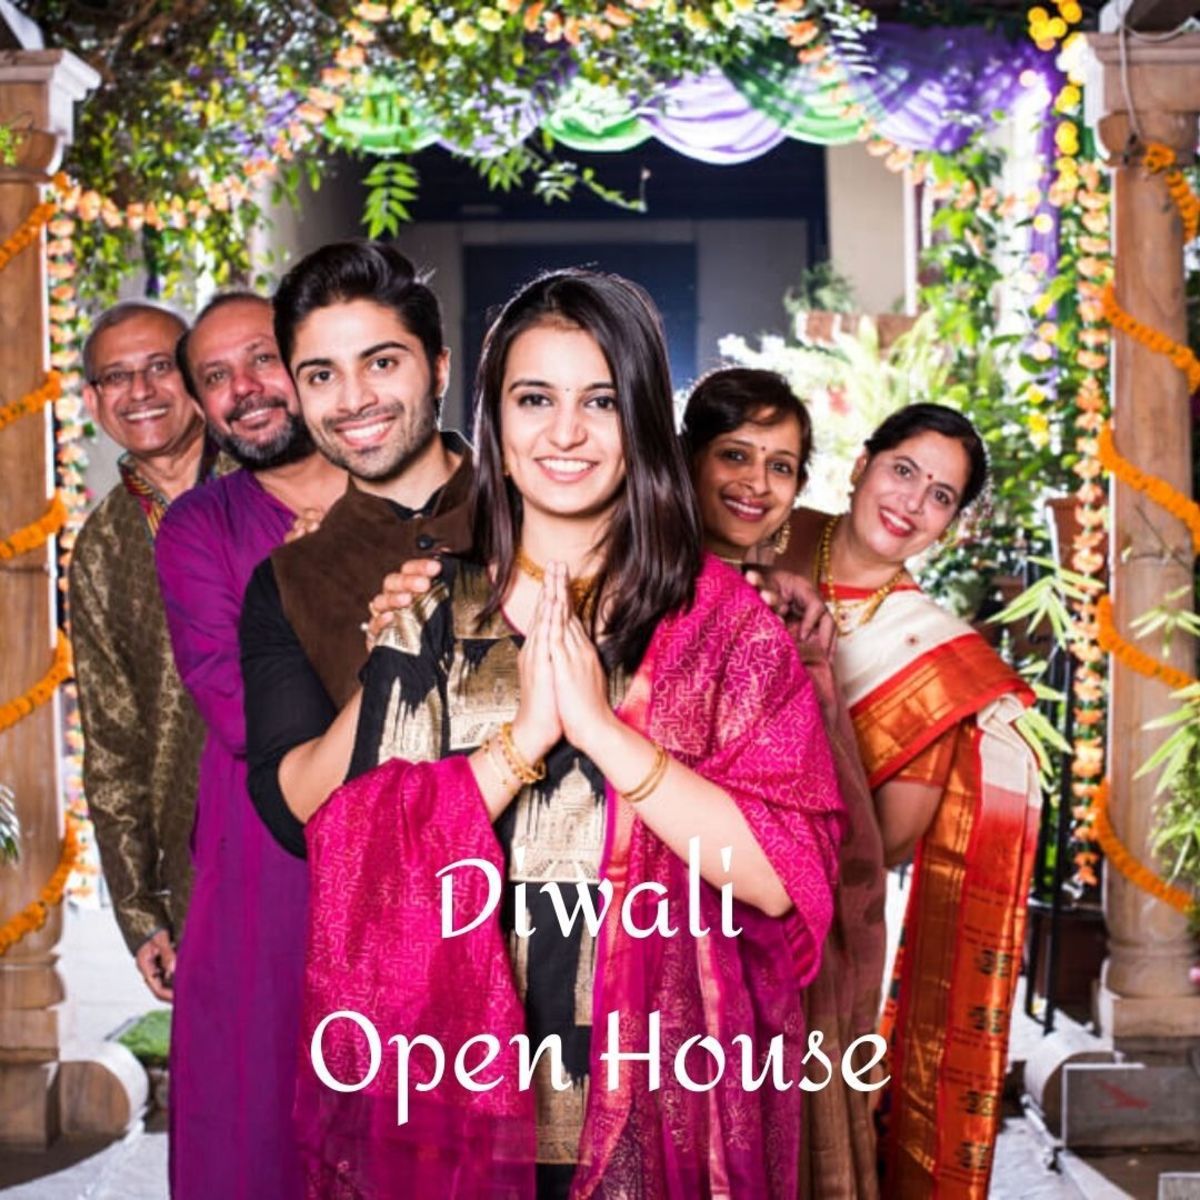 Diwali open house in Malaysia is where family, friends, and business associates are invited to visit the host's home to celebrate Diwali